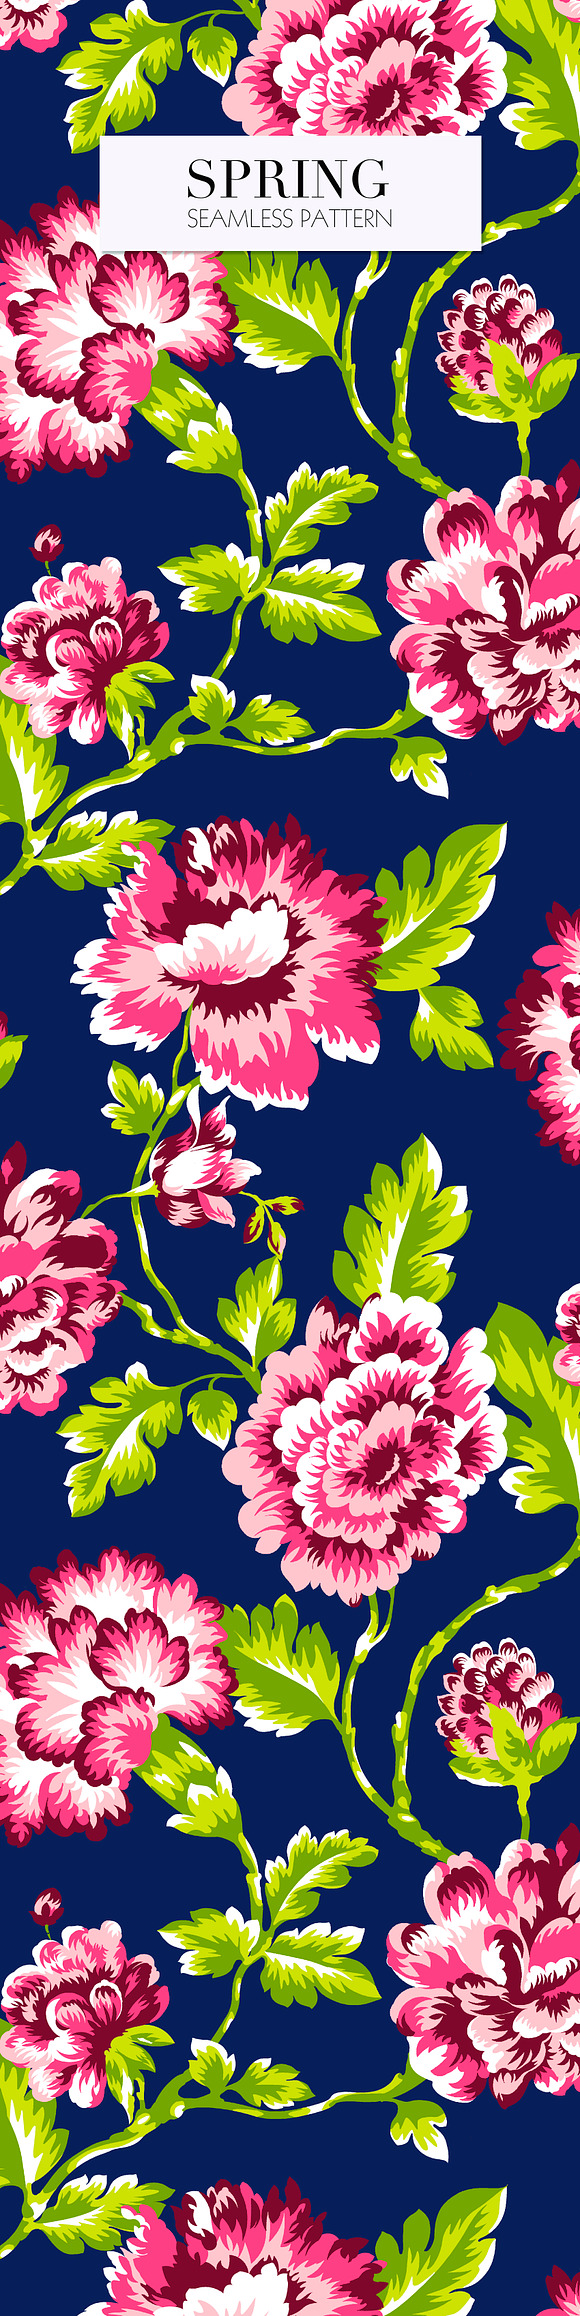 Spring Floral Pattern in Illustrations - product preview 1